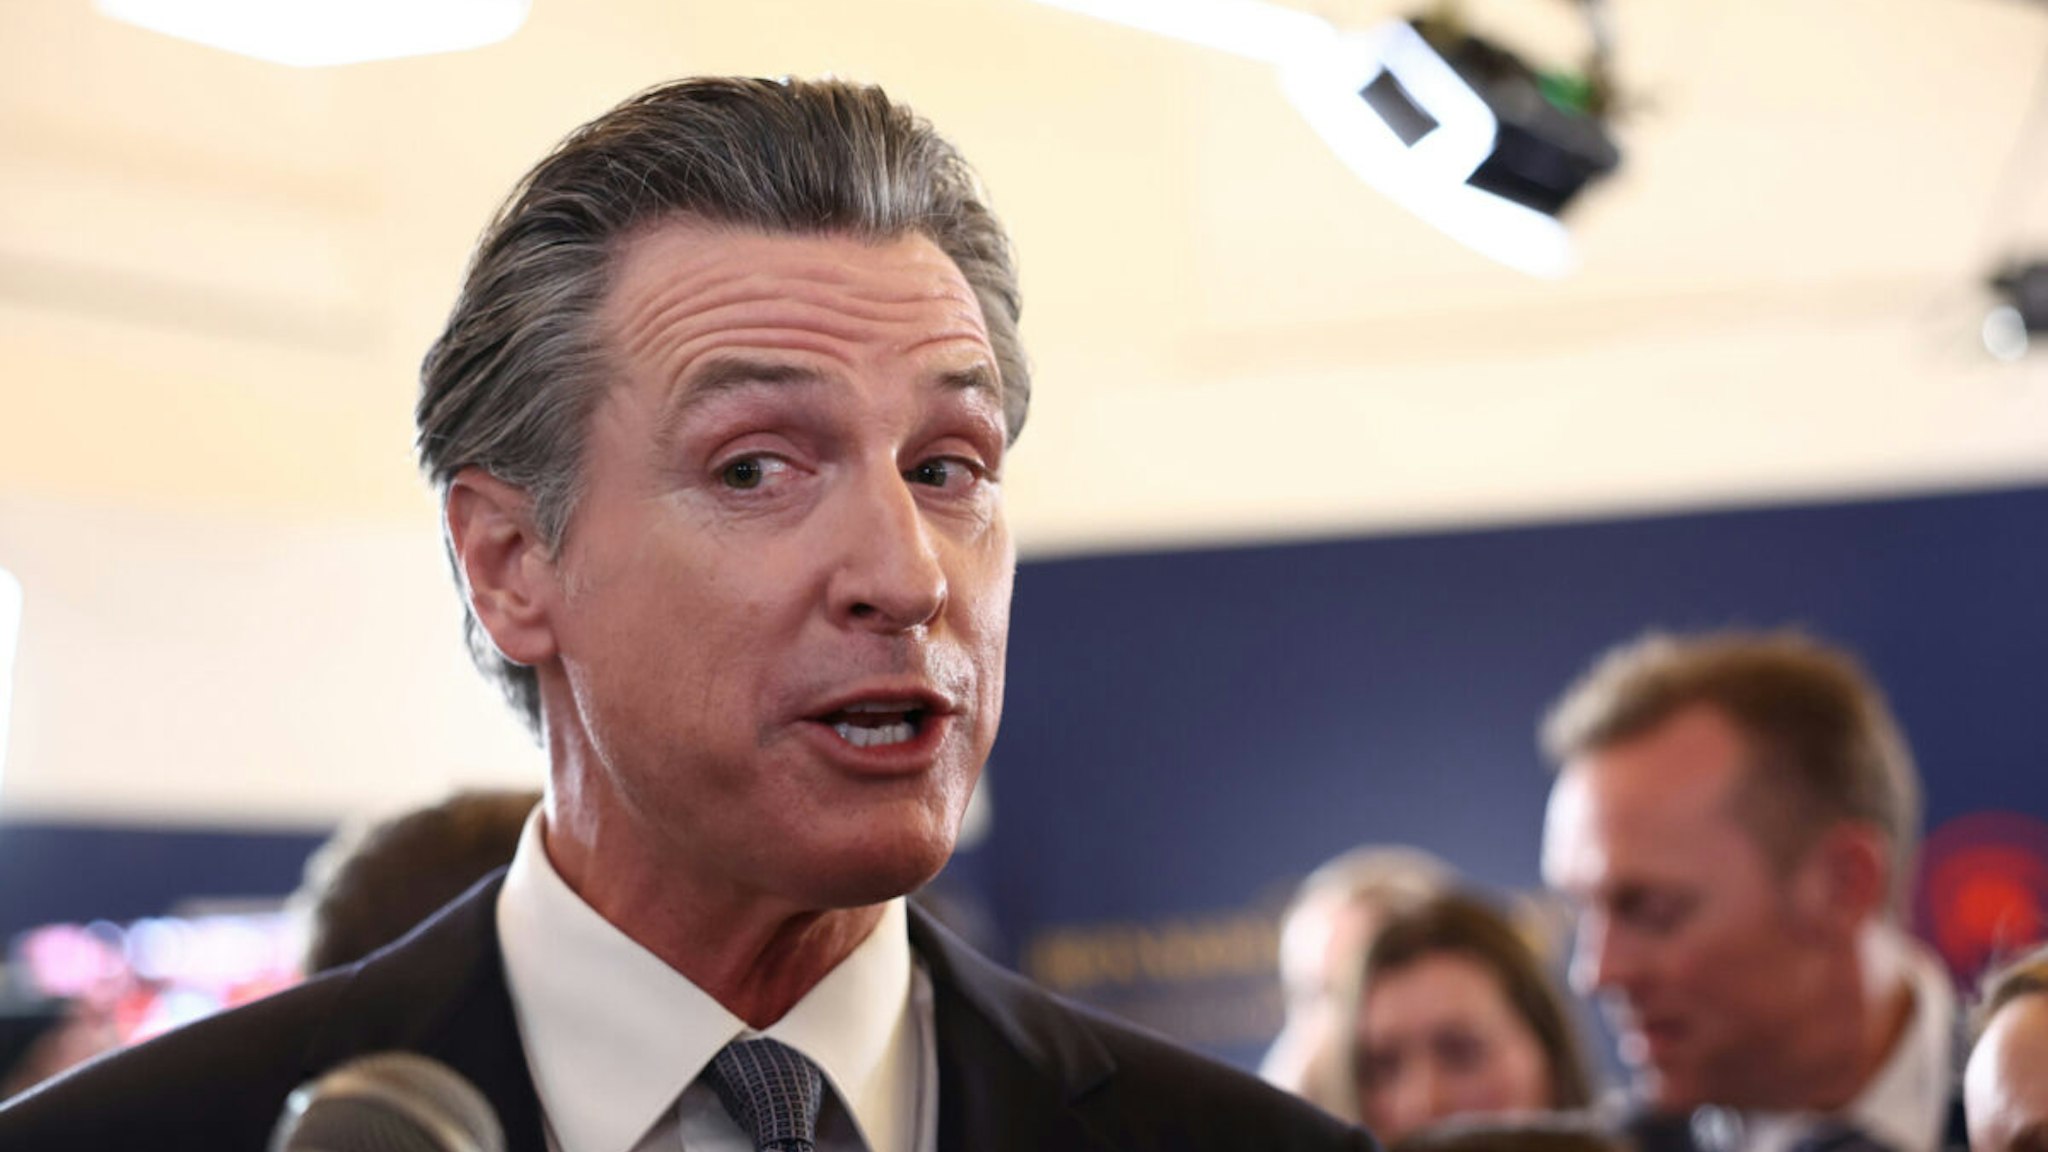 California Gov. Gavin Newsom talks to reporters in the spin room following the FOX Business Republican Primary Debate at the Ronald Reagan Presidential Library on September 27, 2023 in Simi Valley, California.